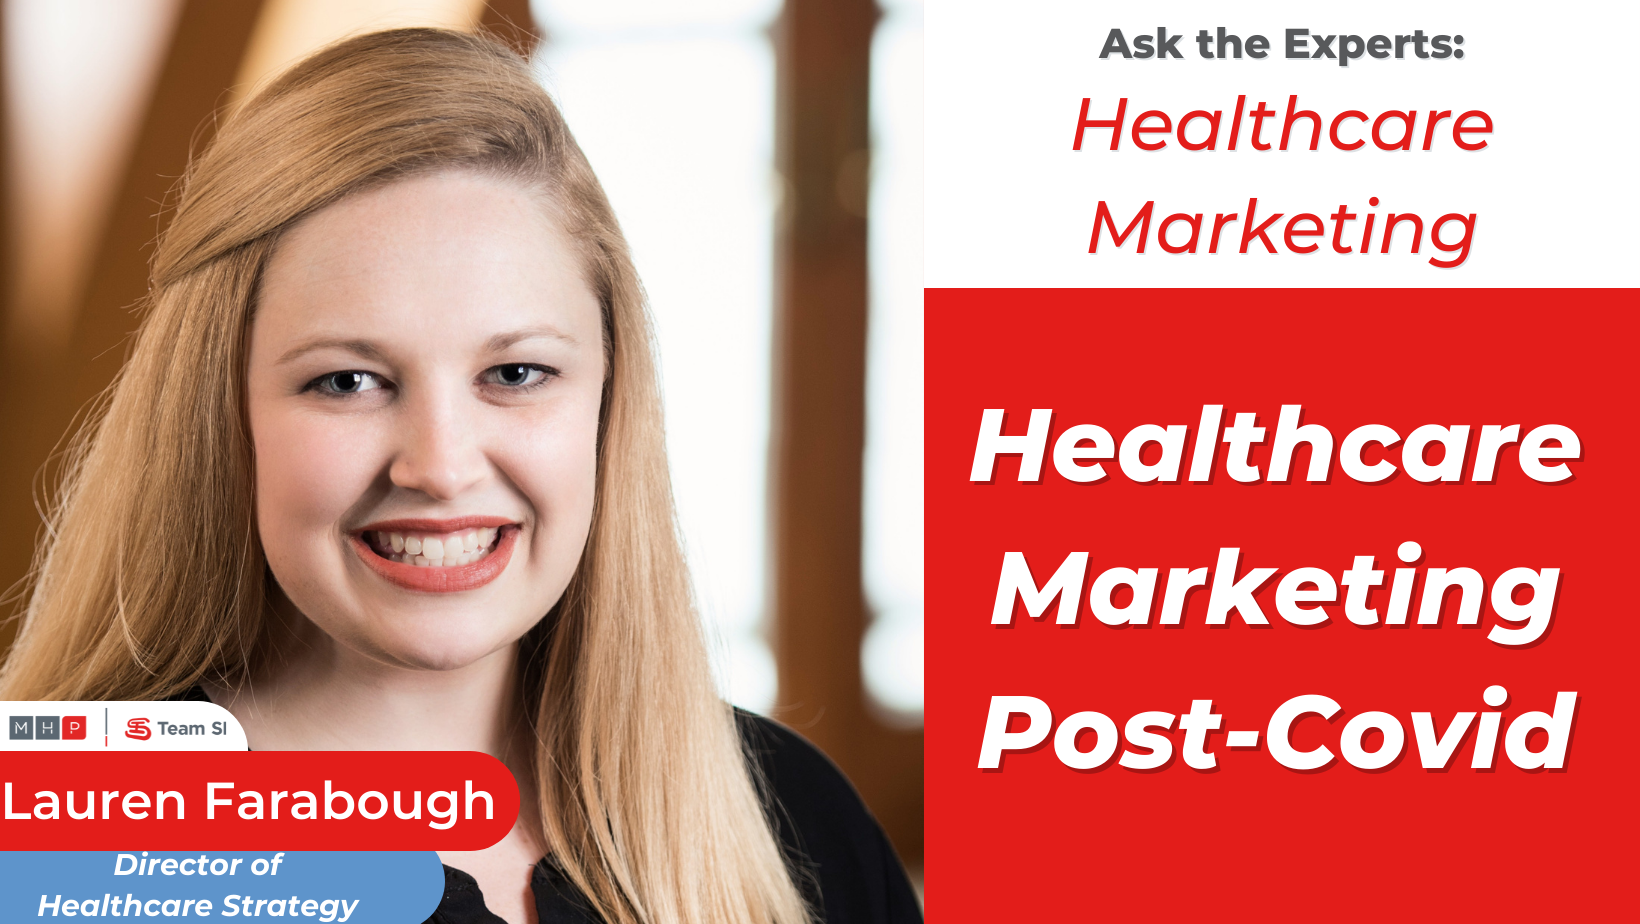 Lauren Farabough, director of healthcare strategy, features as part of ask the experts on the topic of healthcare marketing post covid